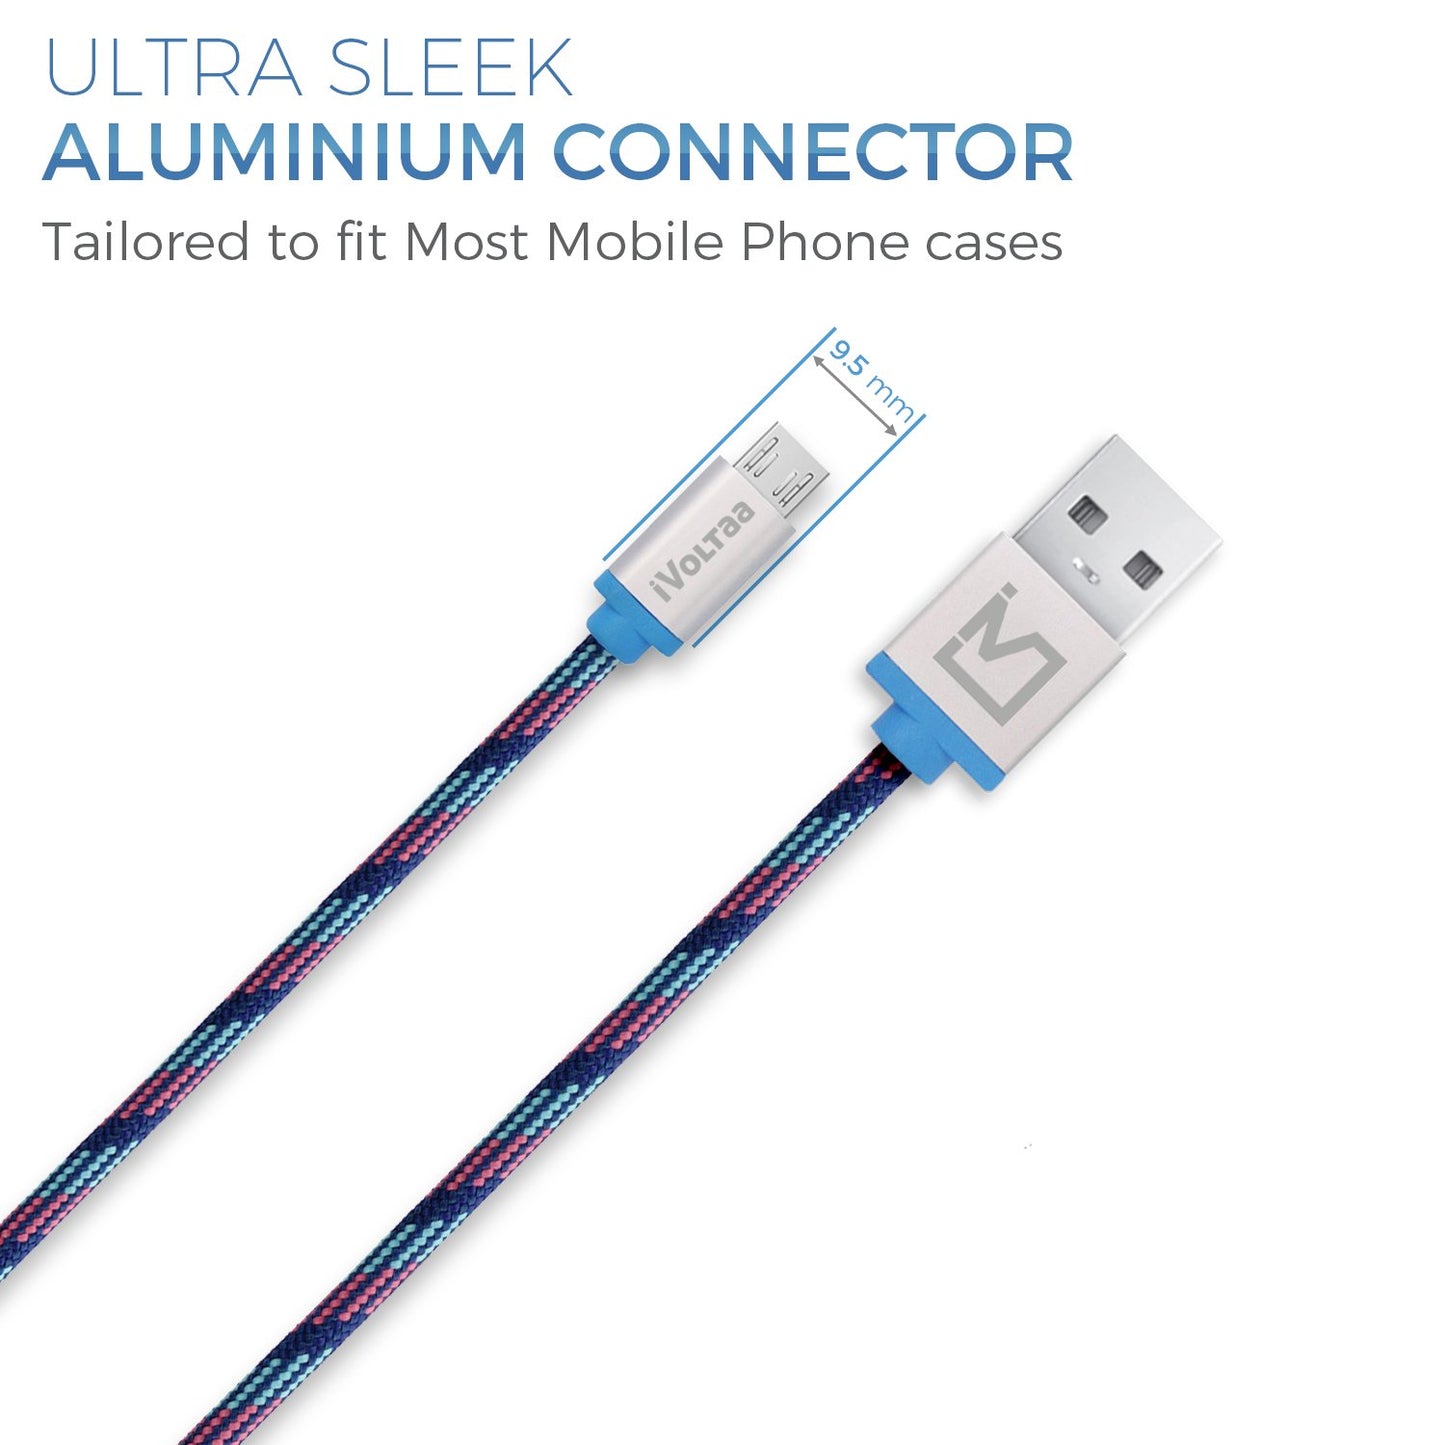 iVoltaa Pixie Micro USB to USB 2.4 Braided Cable - 3.3 Feet (1 Meter) - Kyber Blue